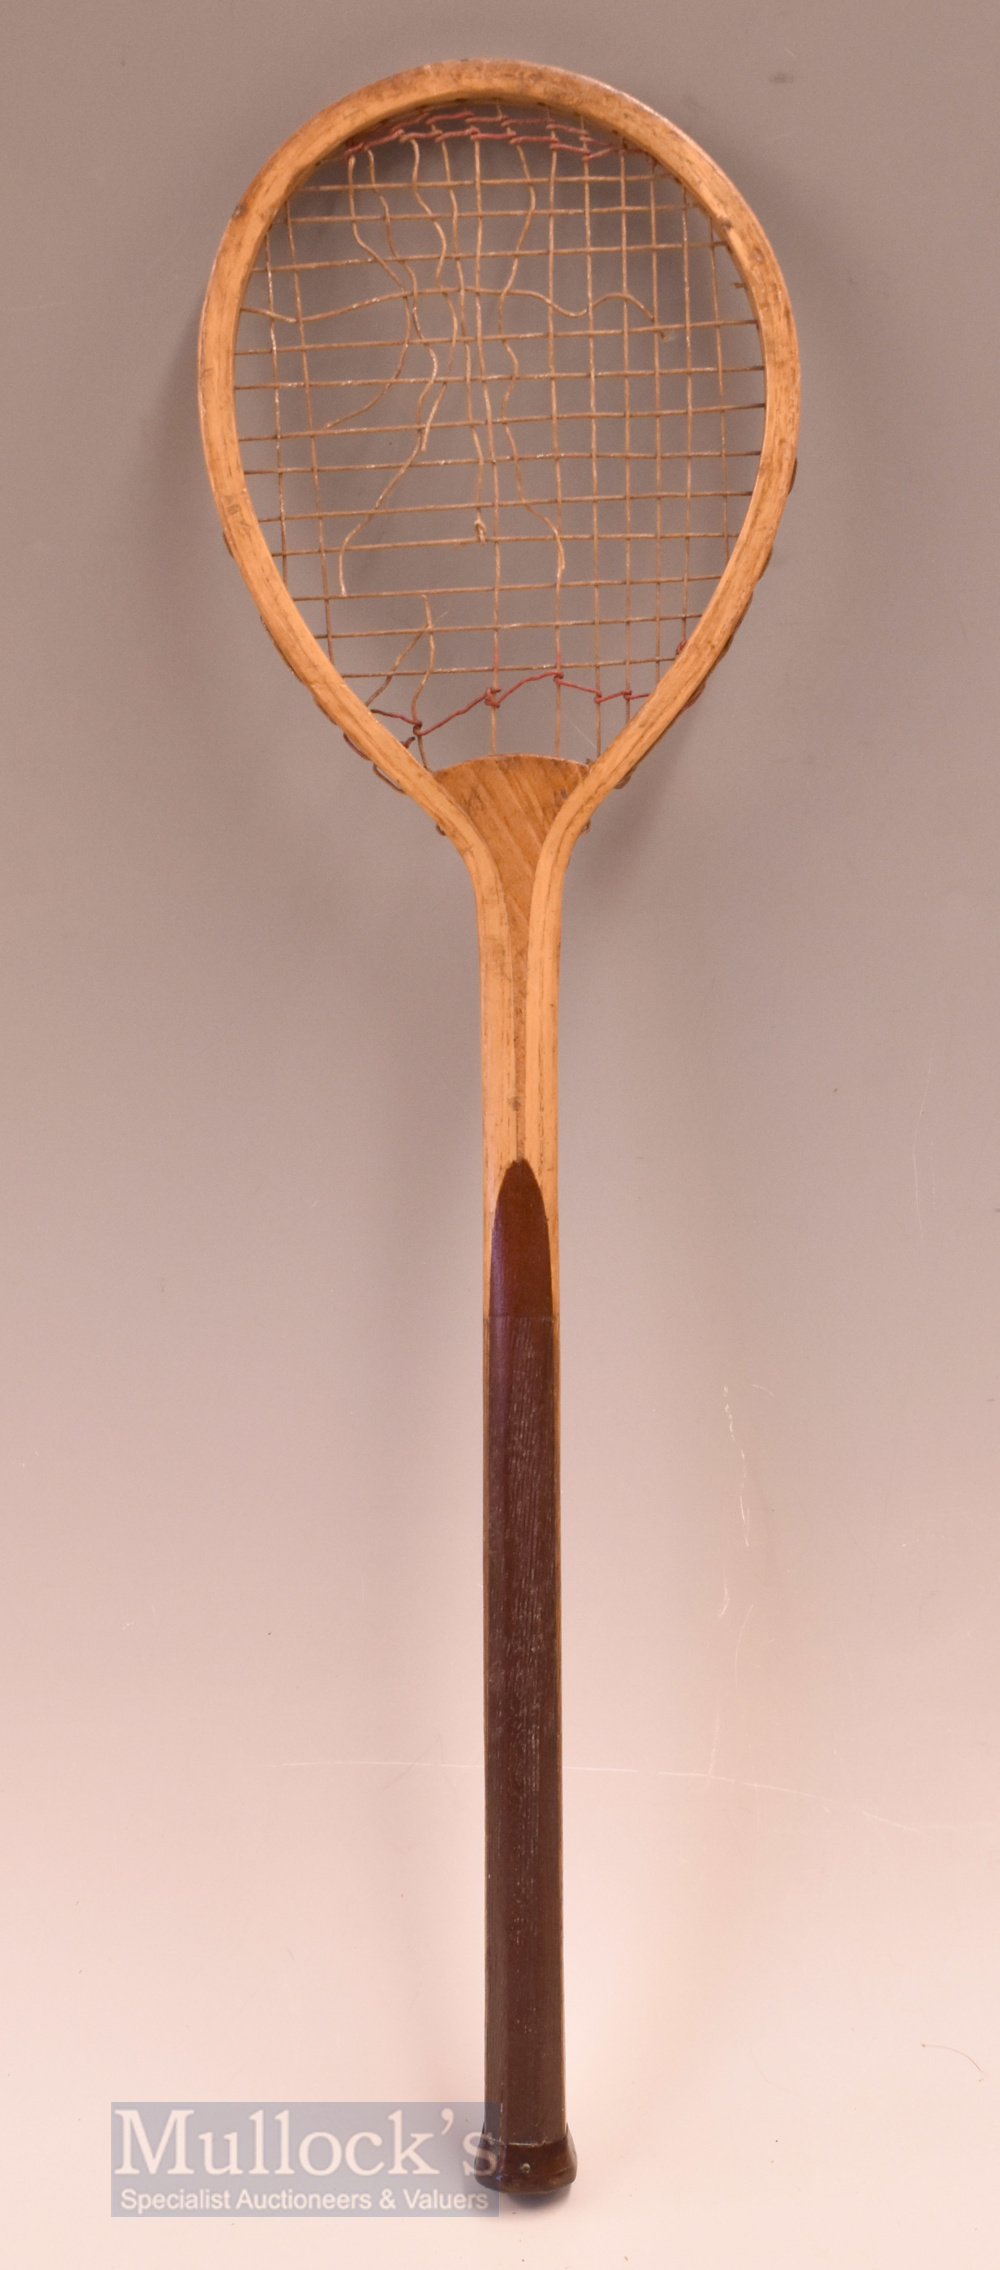 c1880 wooden badminton racket with small round head, no maker’s marks, convex wedge, measures 59cm